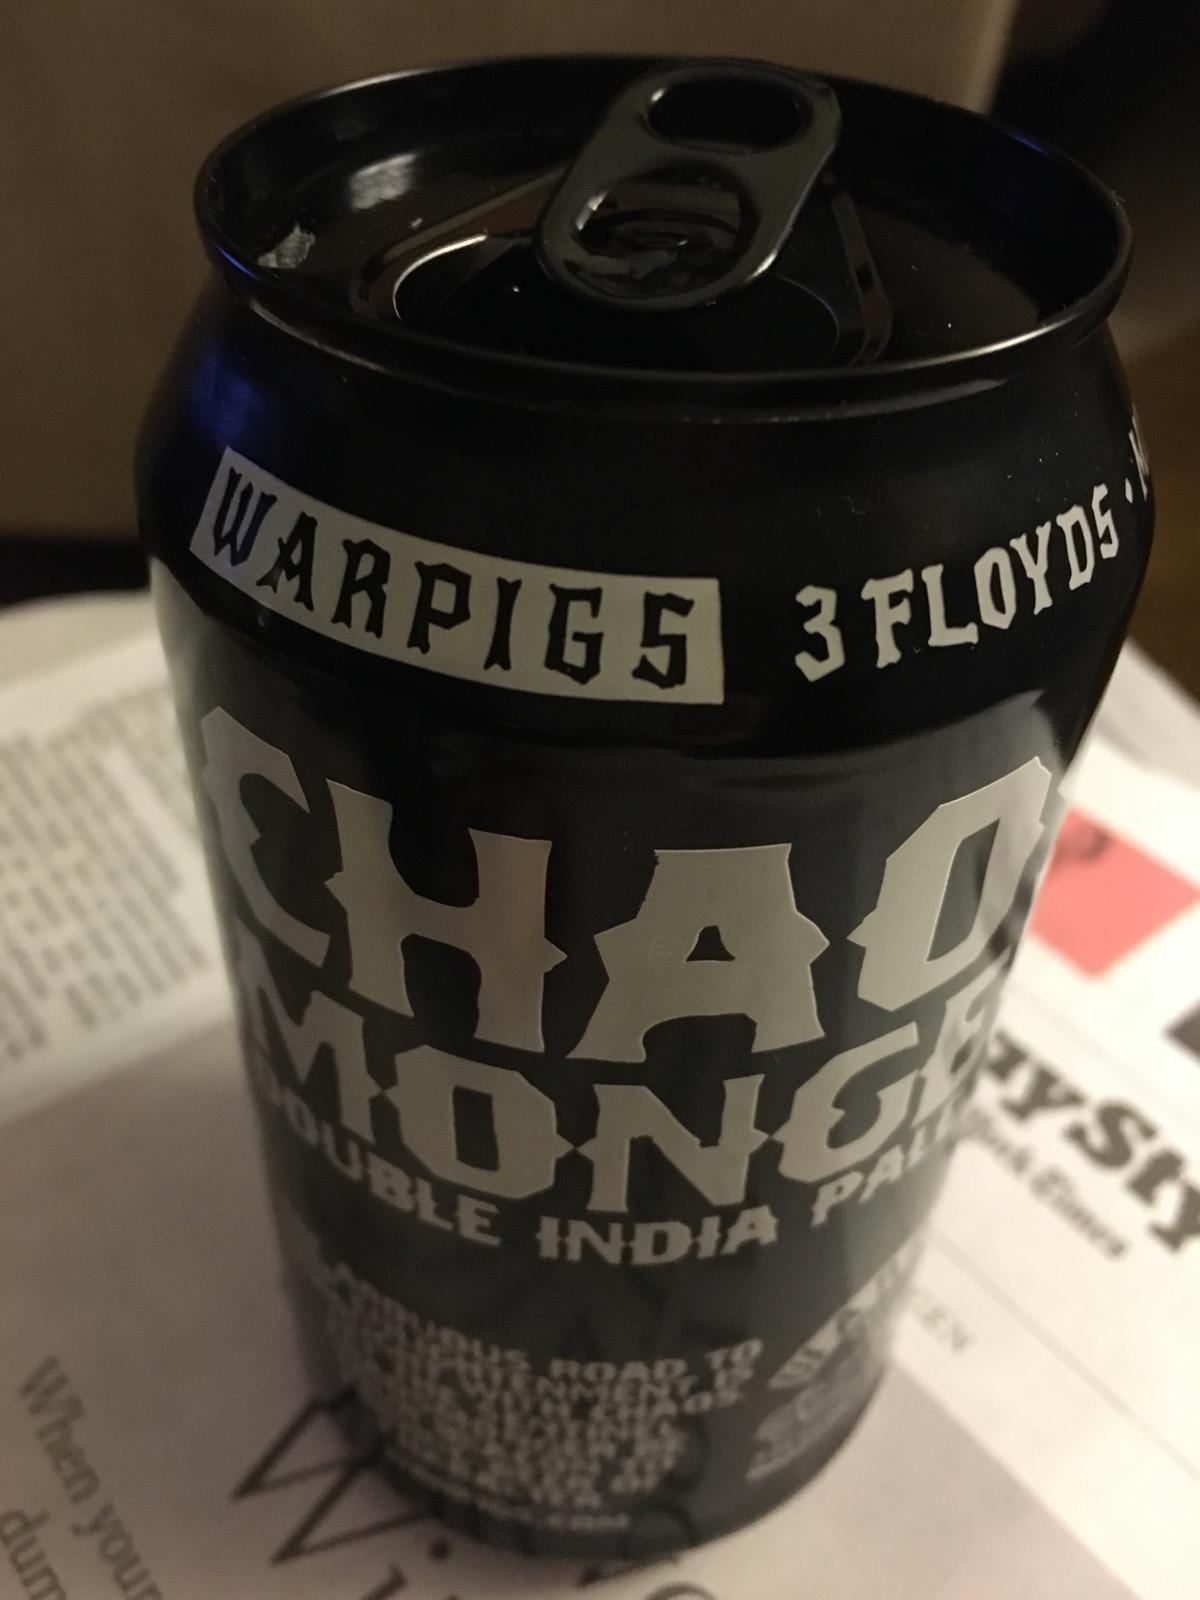 Chaos Monger (Collaboration with Three Floyds)